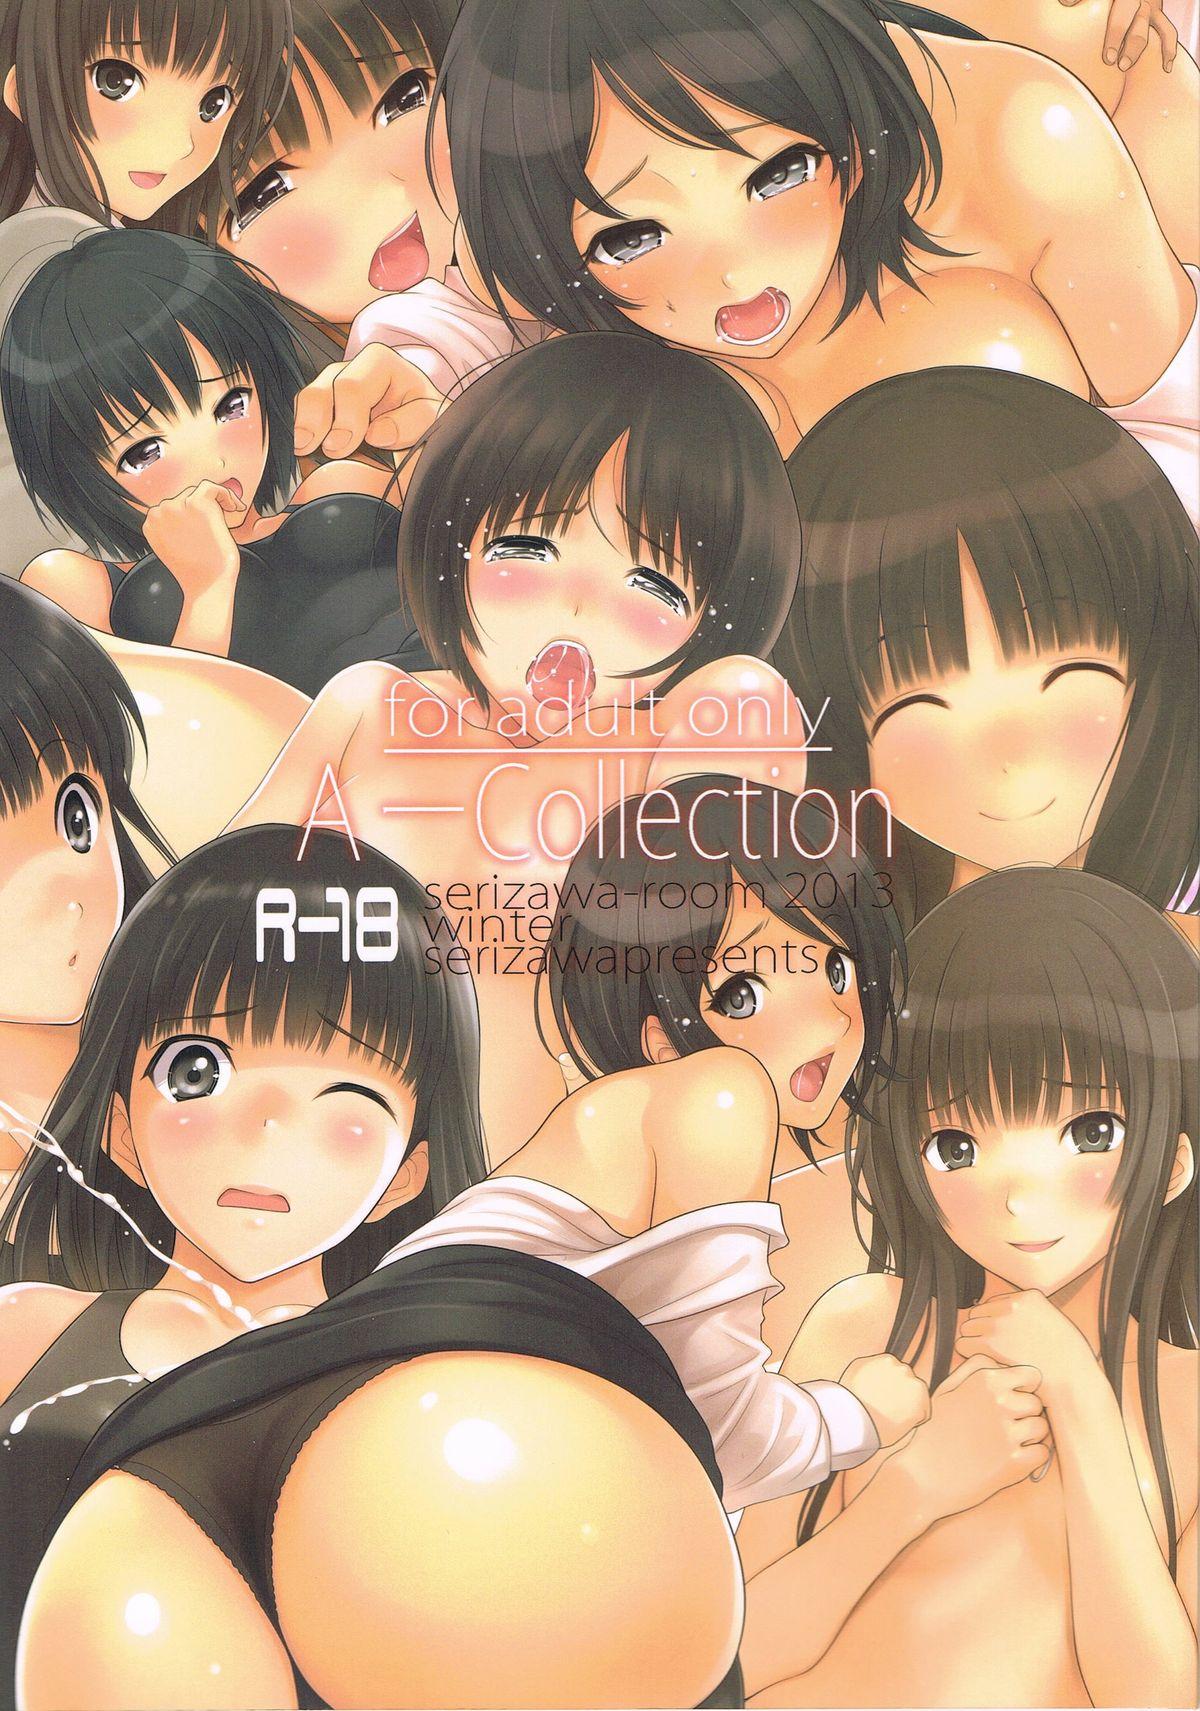 A-Collection 0